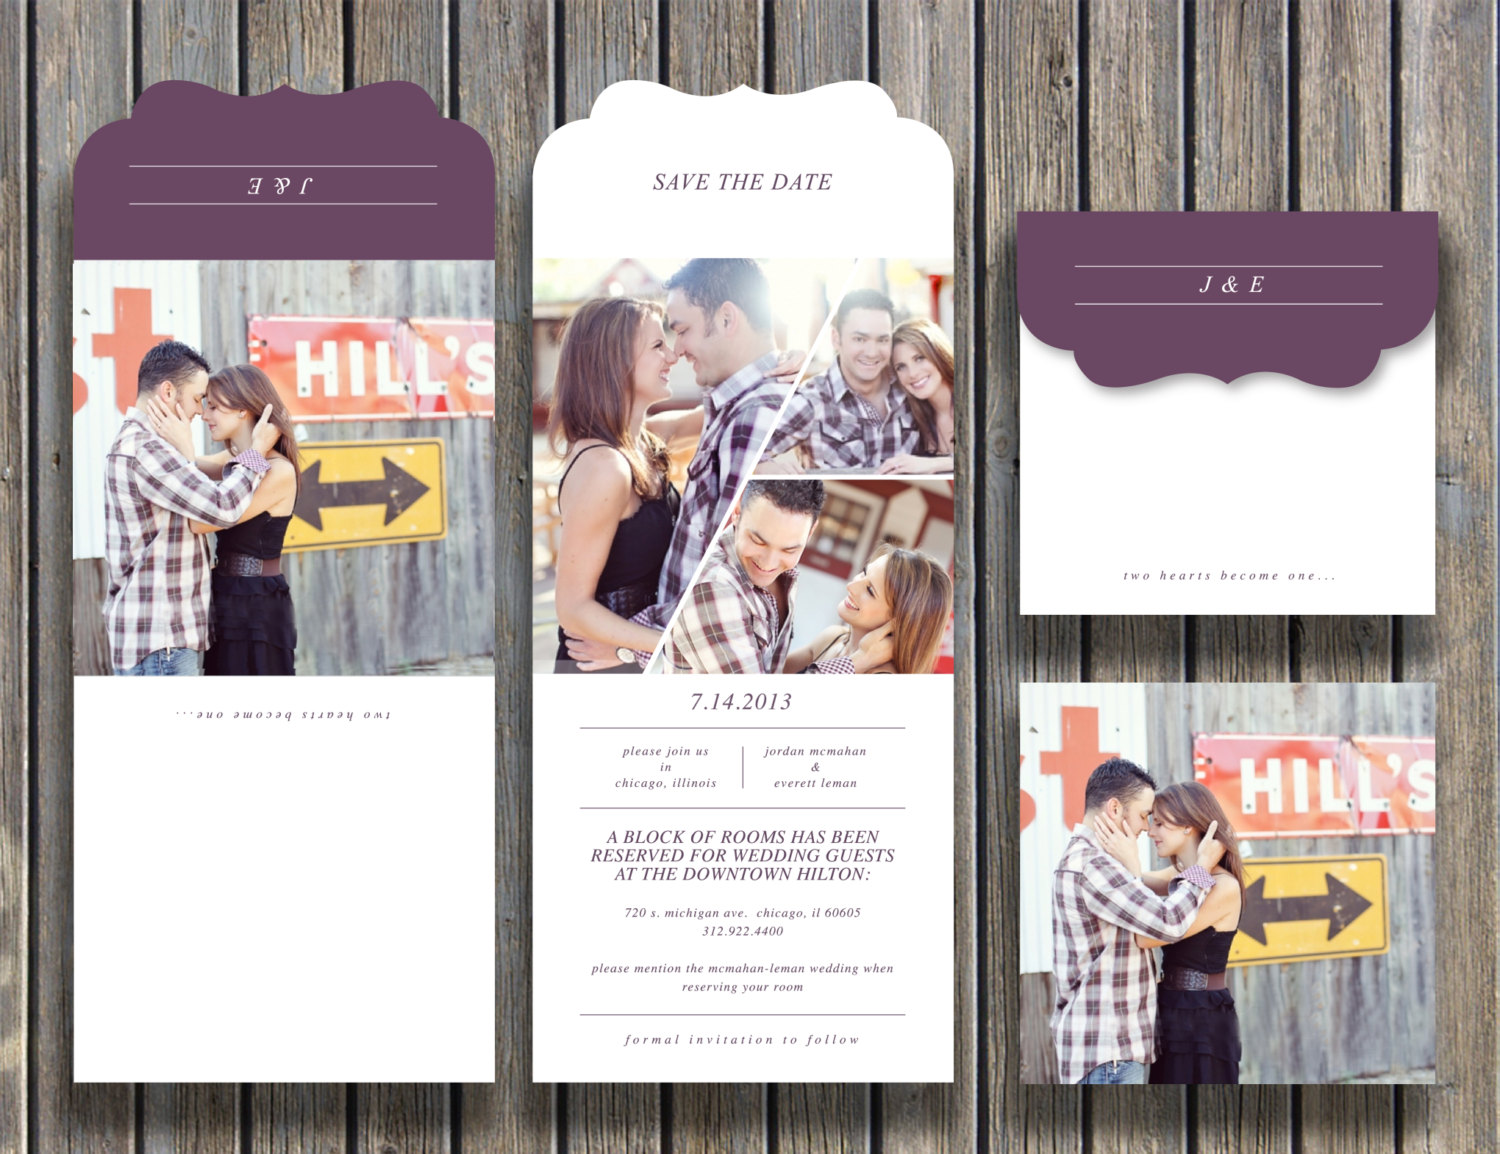 Save the Date Photoshop Template